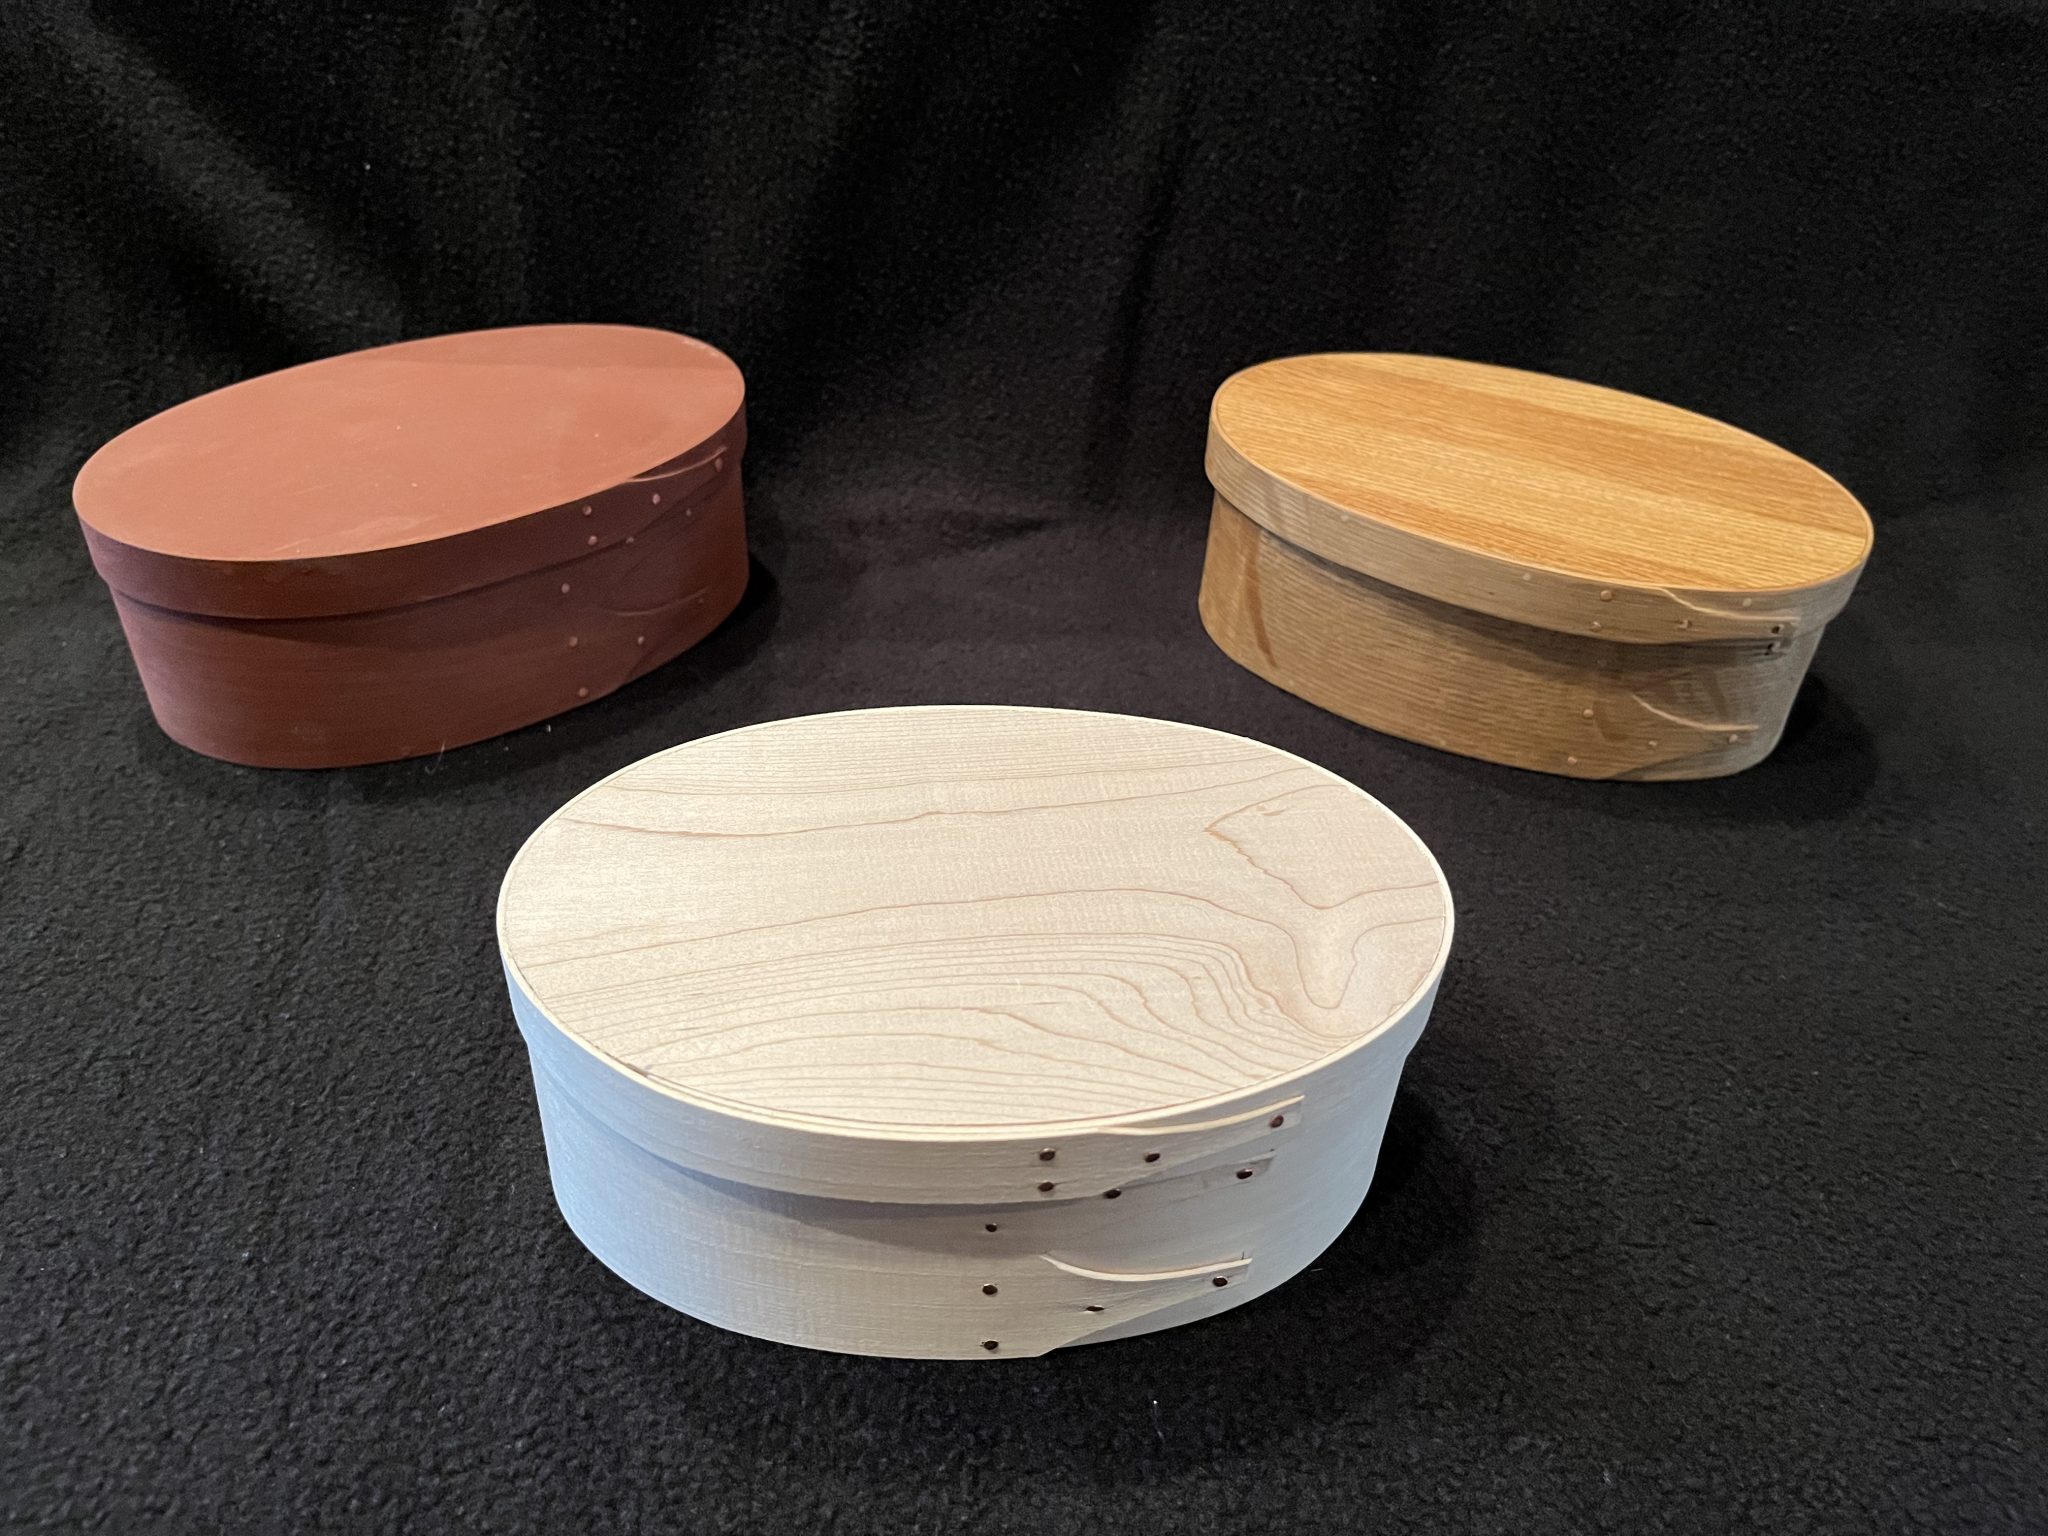 These boxes are the same size but with differing woods and finishes.  Two are maple (one with clear coat and one with milk paint).  The third is quartersawn white oak